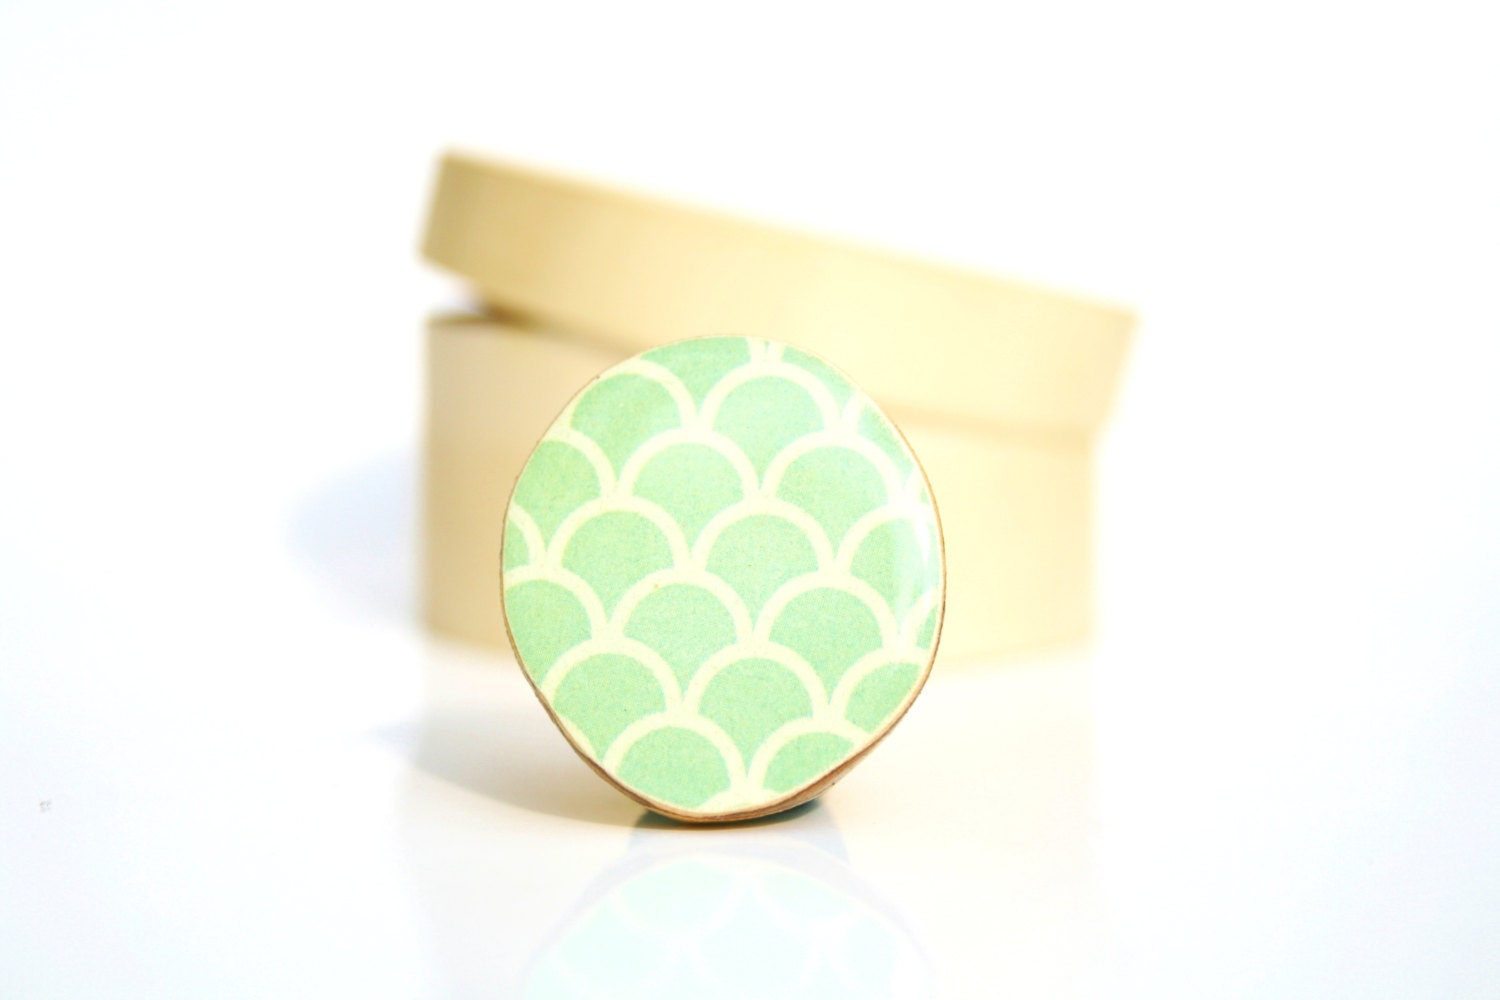 Mint Cocktail Ring Mint green scallop pattern Adjustable ring Summer jewelry eco friendly statement ring. Summer fashion Starlight Woods - starlightwoods